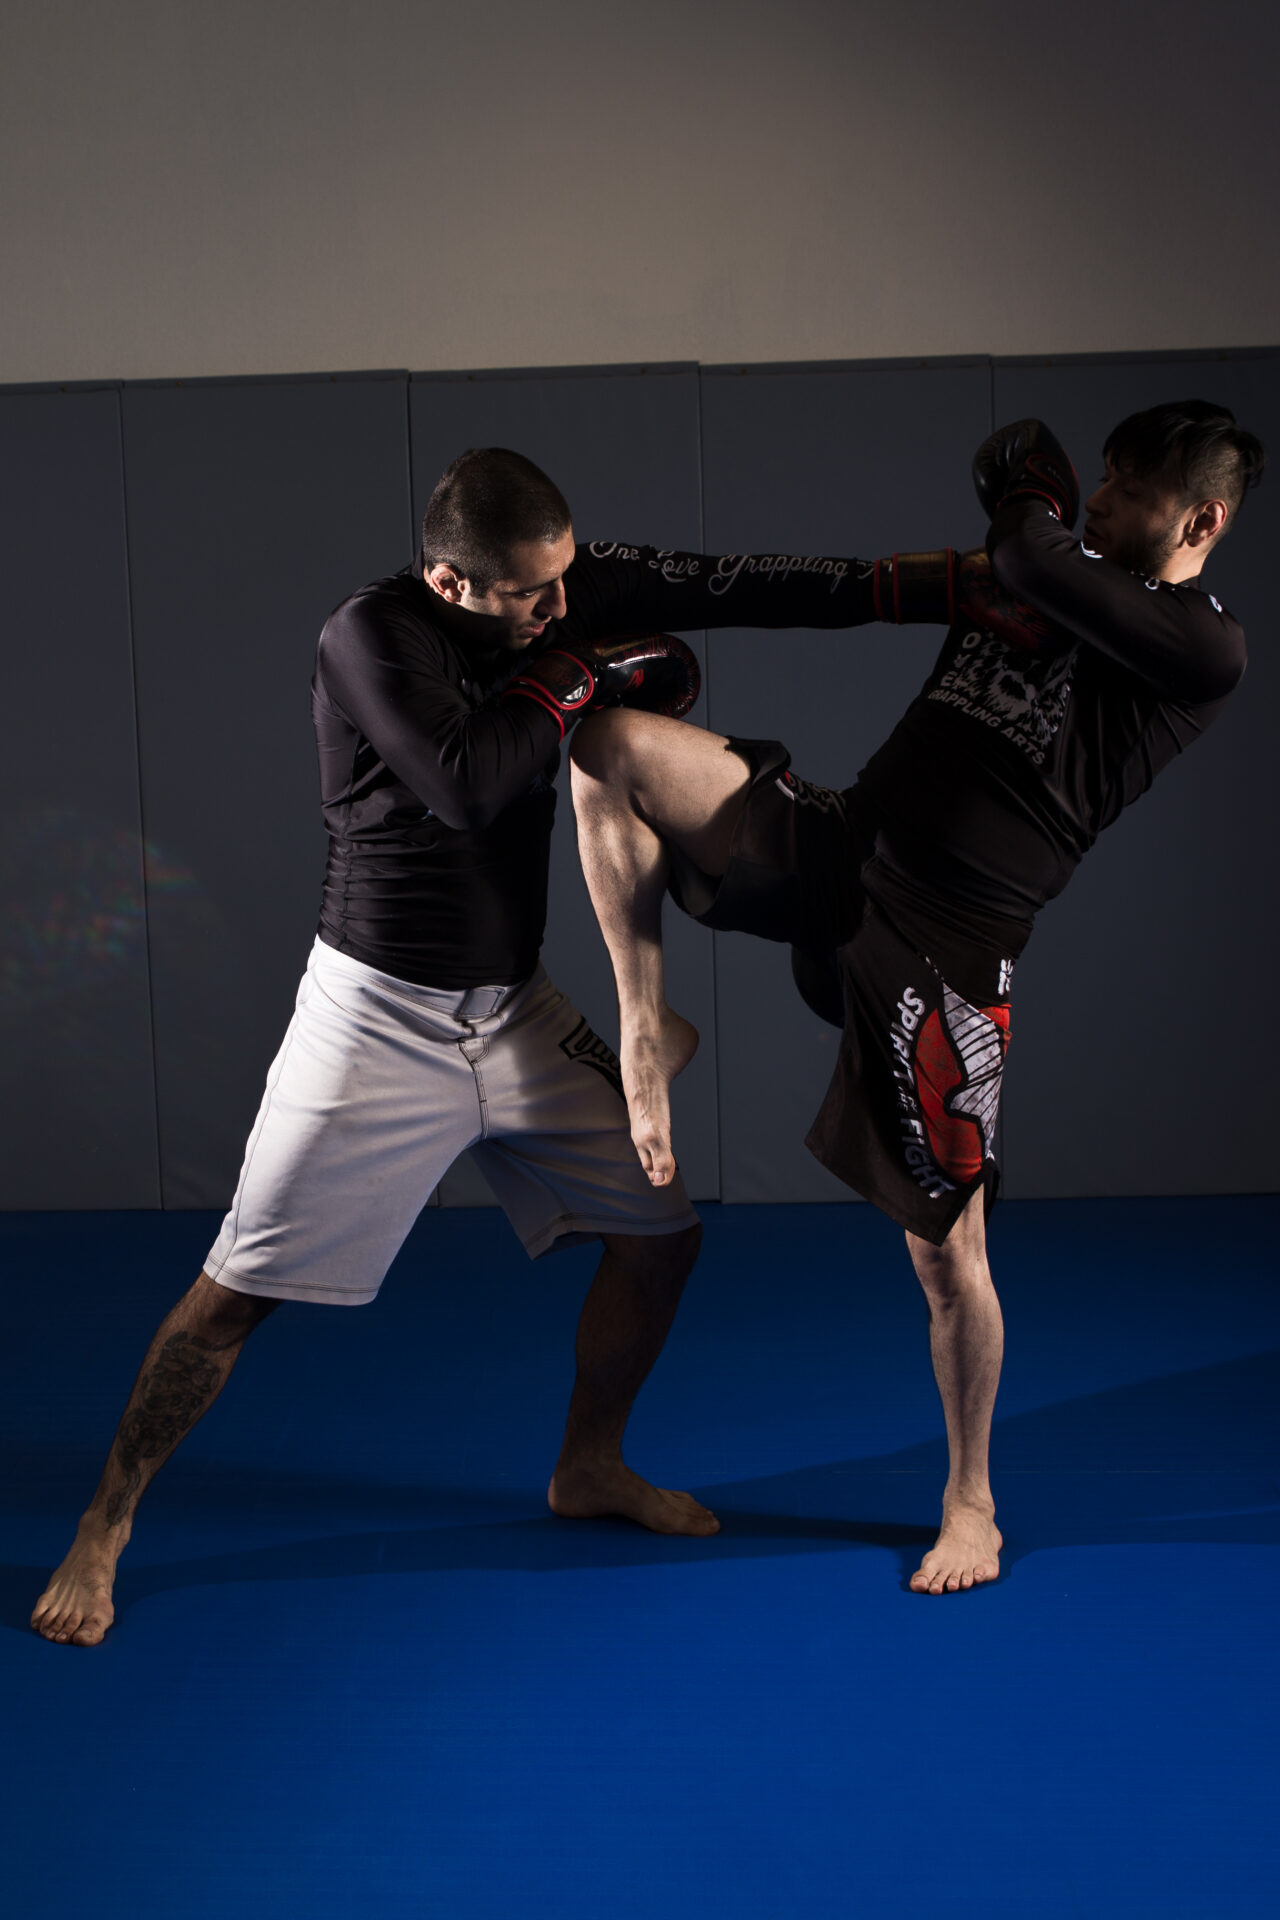 Two men are practicing martial arts in a gym.